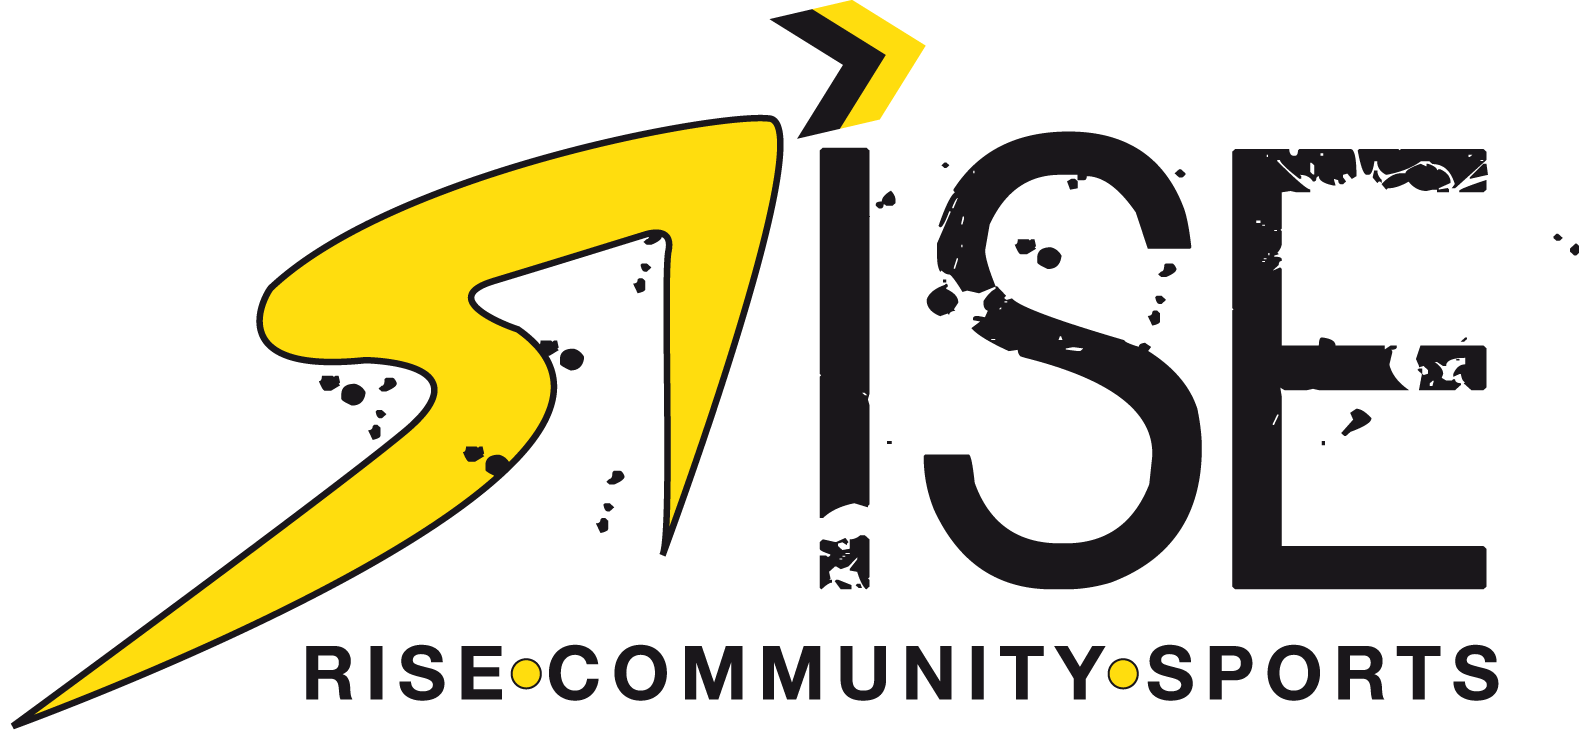 RISE is about community sports, equipping young people, creating opportunities, Welsh House Farm, multi-sports, creating hope & seeing a sporting legacy!